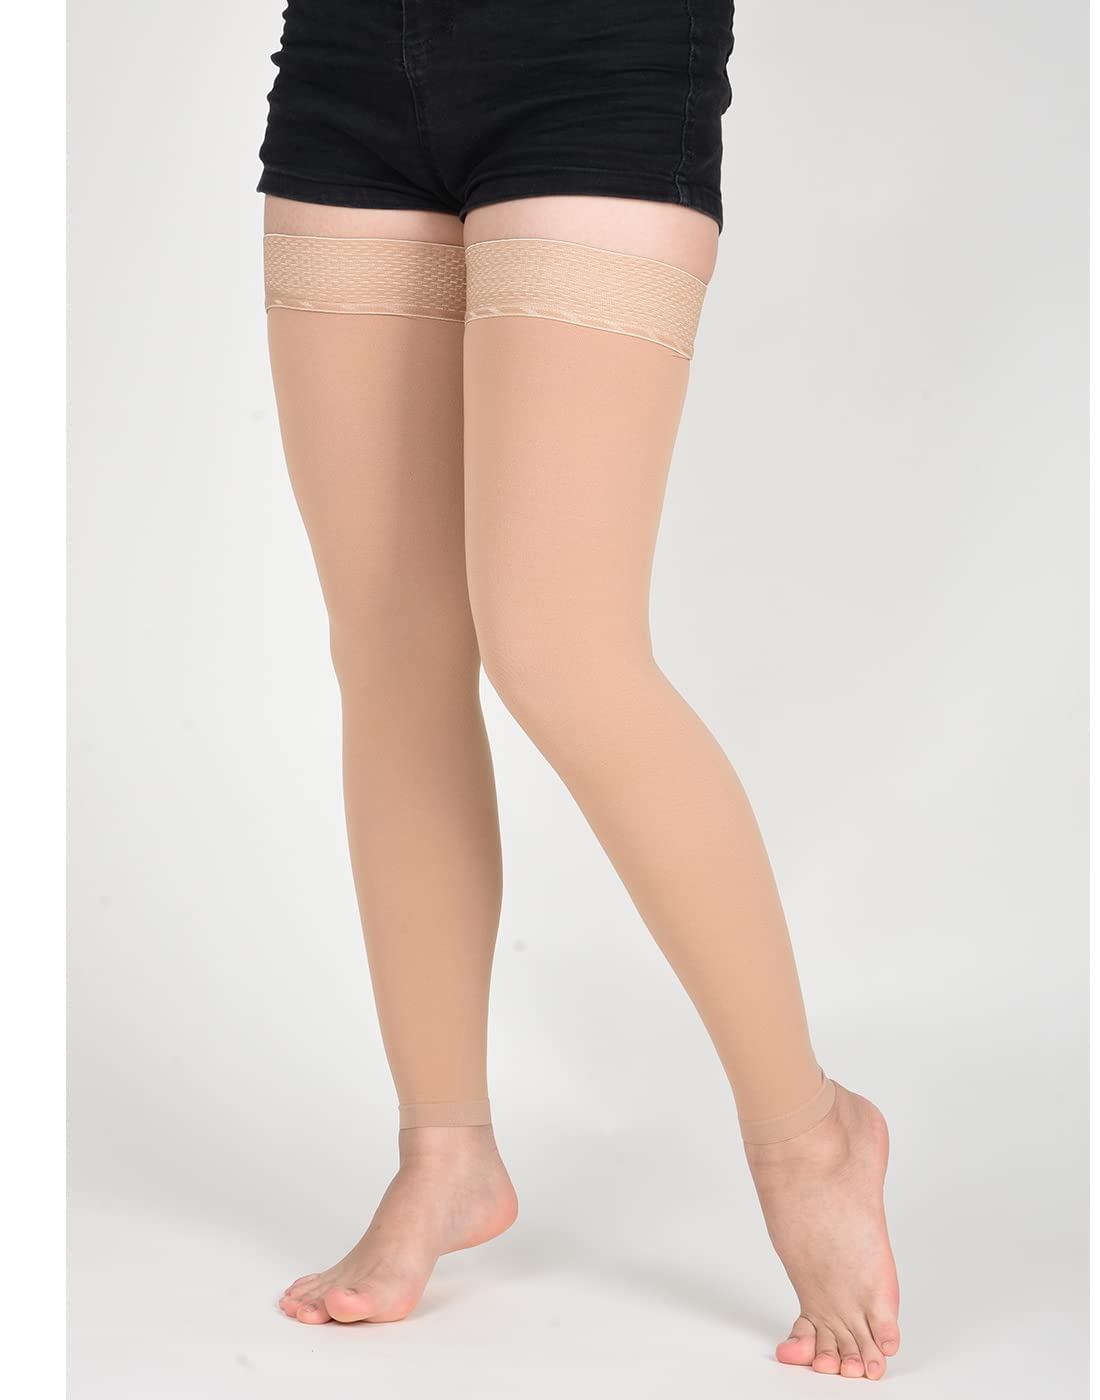 Fashion High Waist Medical Compression Pantyhose For Varicose Veins Women Compression  Stockings Beige @ Best Price Online